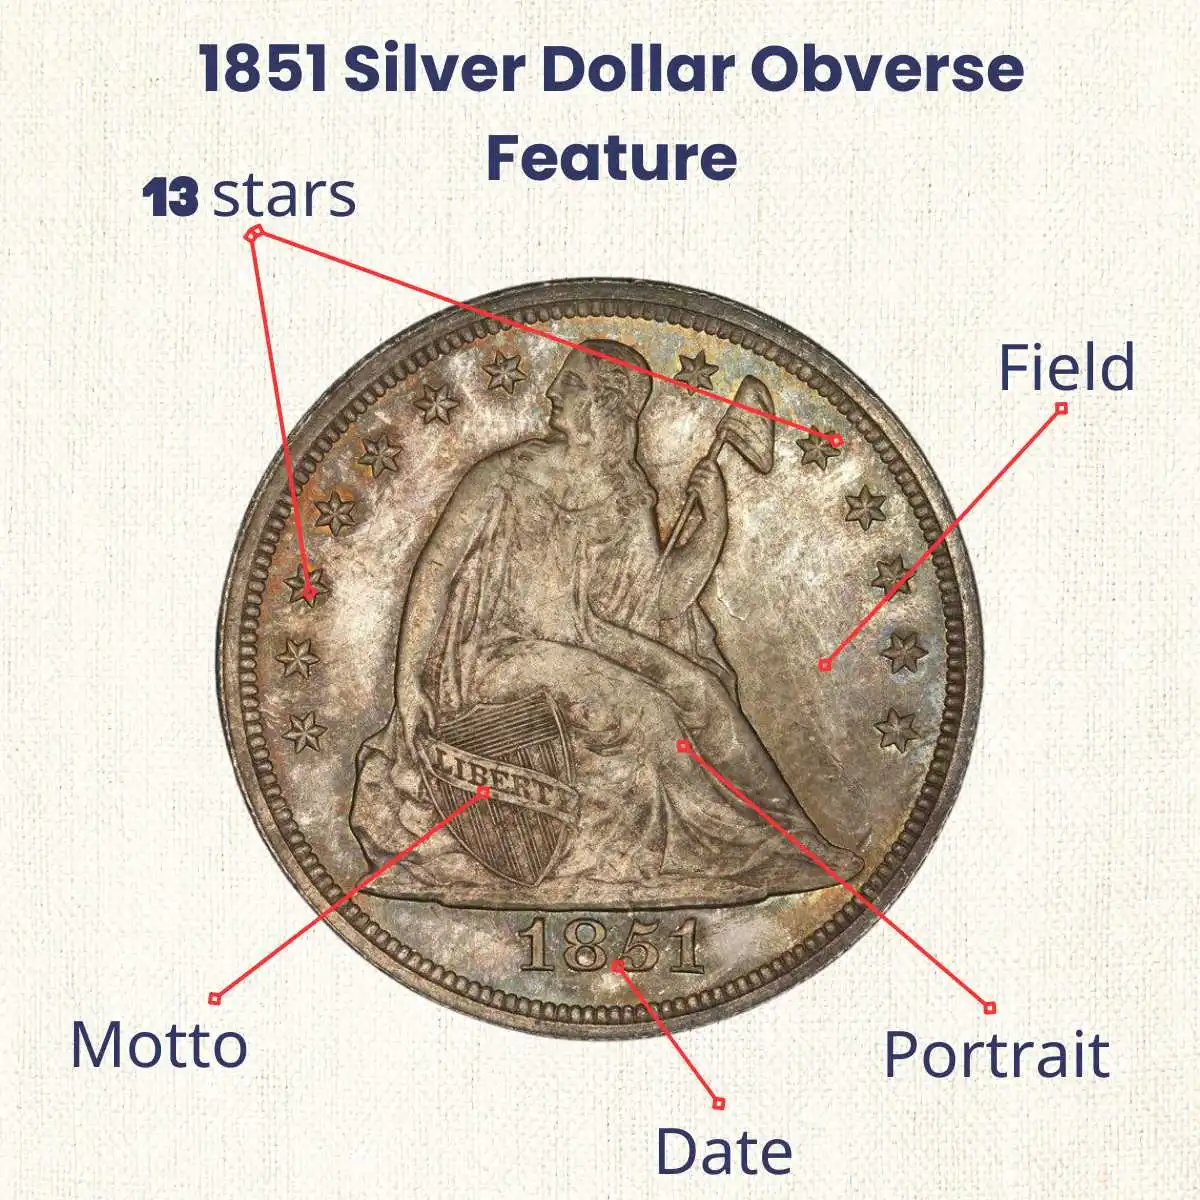 1851 Silver Dollar obverse feature